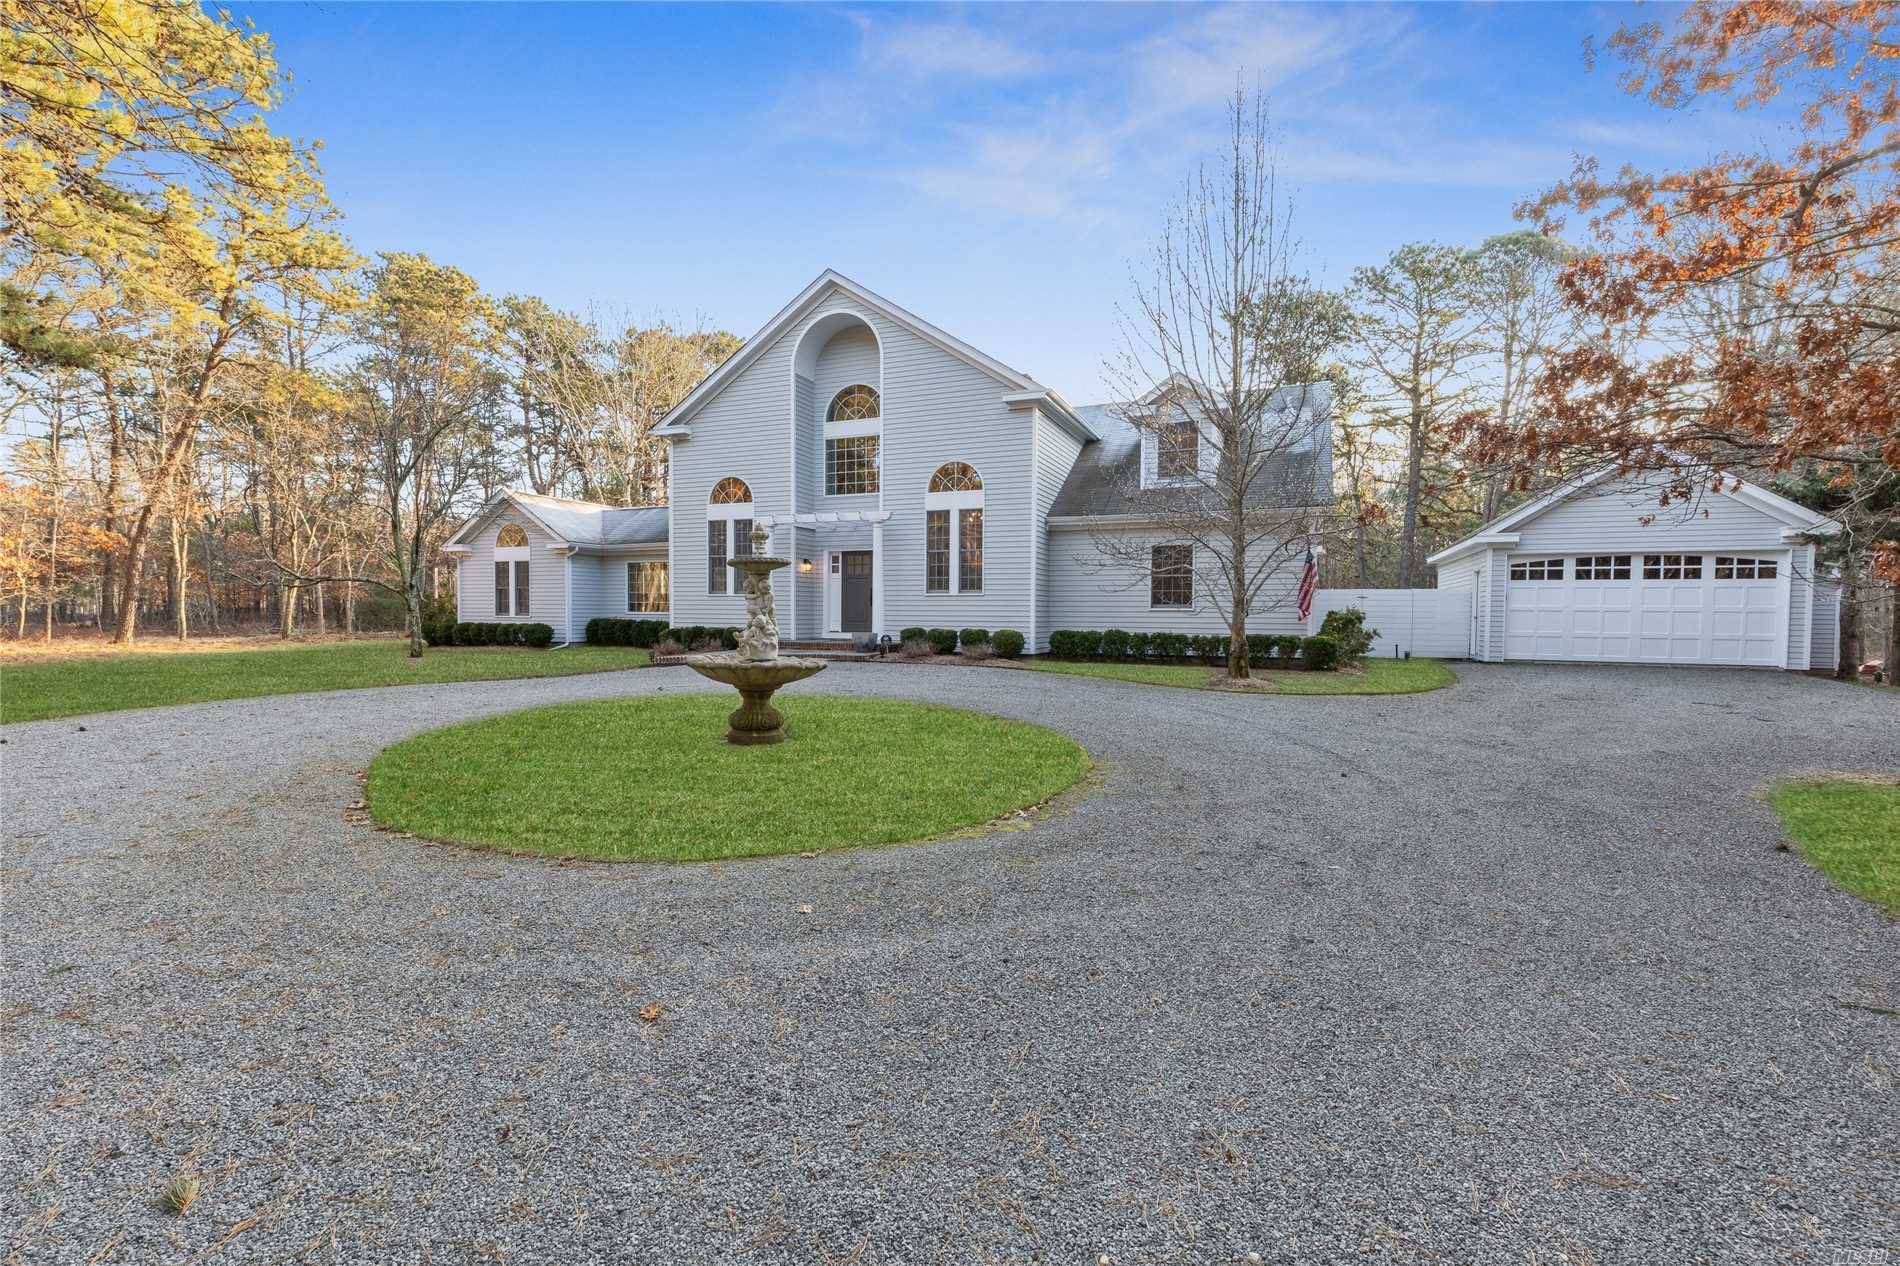 This Outstanding Contemporary Home, Completely Renovated In 2015, Is Situated Just Five Minutes From Sag Harbor Village And Eight Minutes From East Hampton Village.